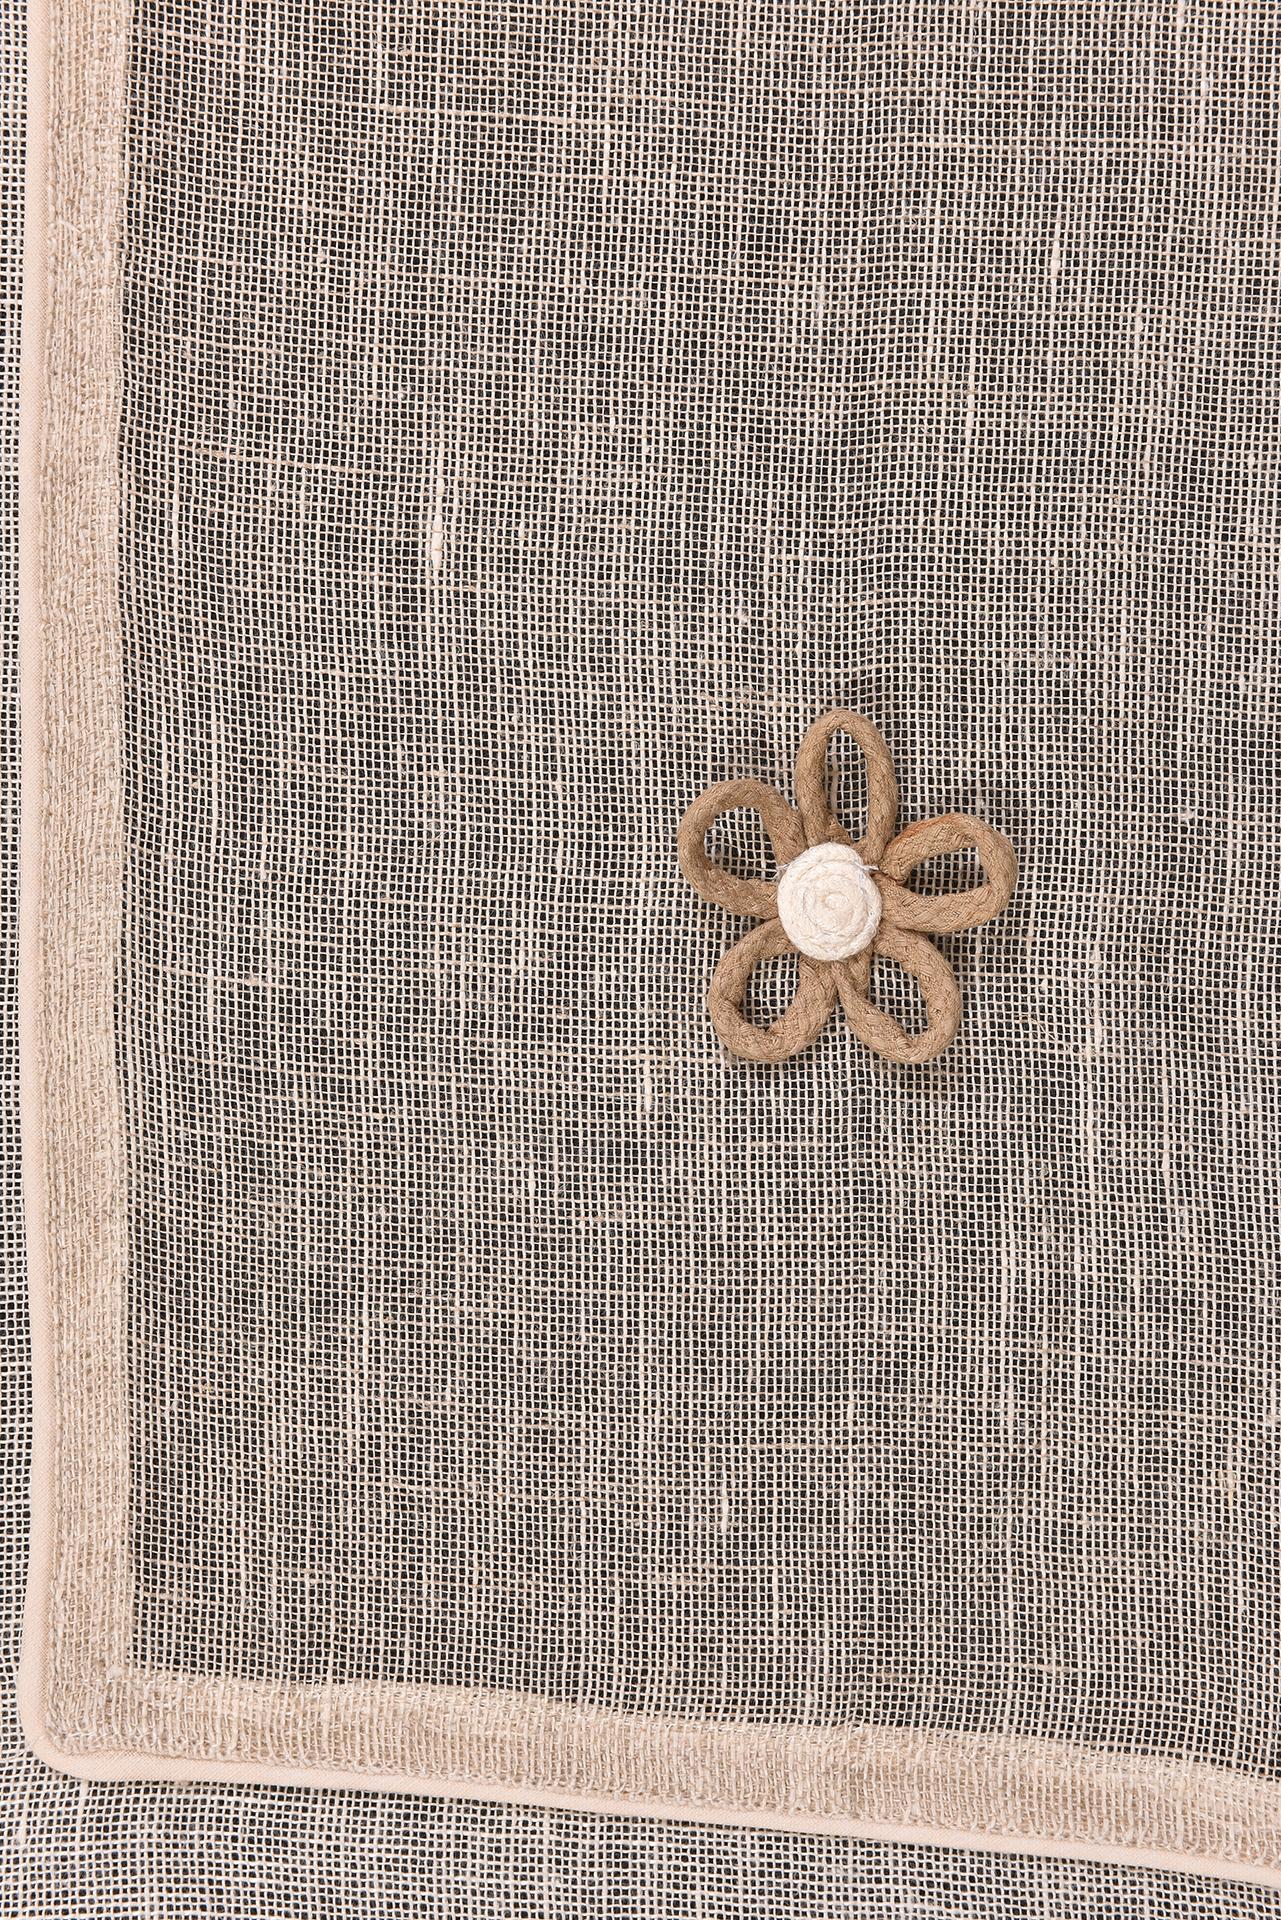 Contemporary Curtain With Daisies For Sale